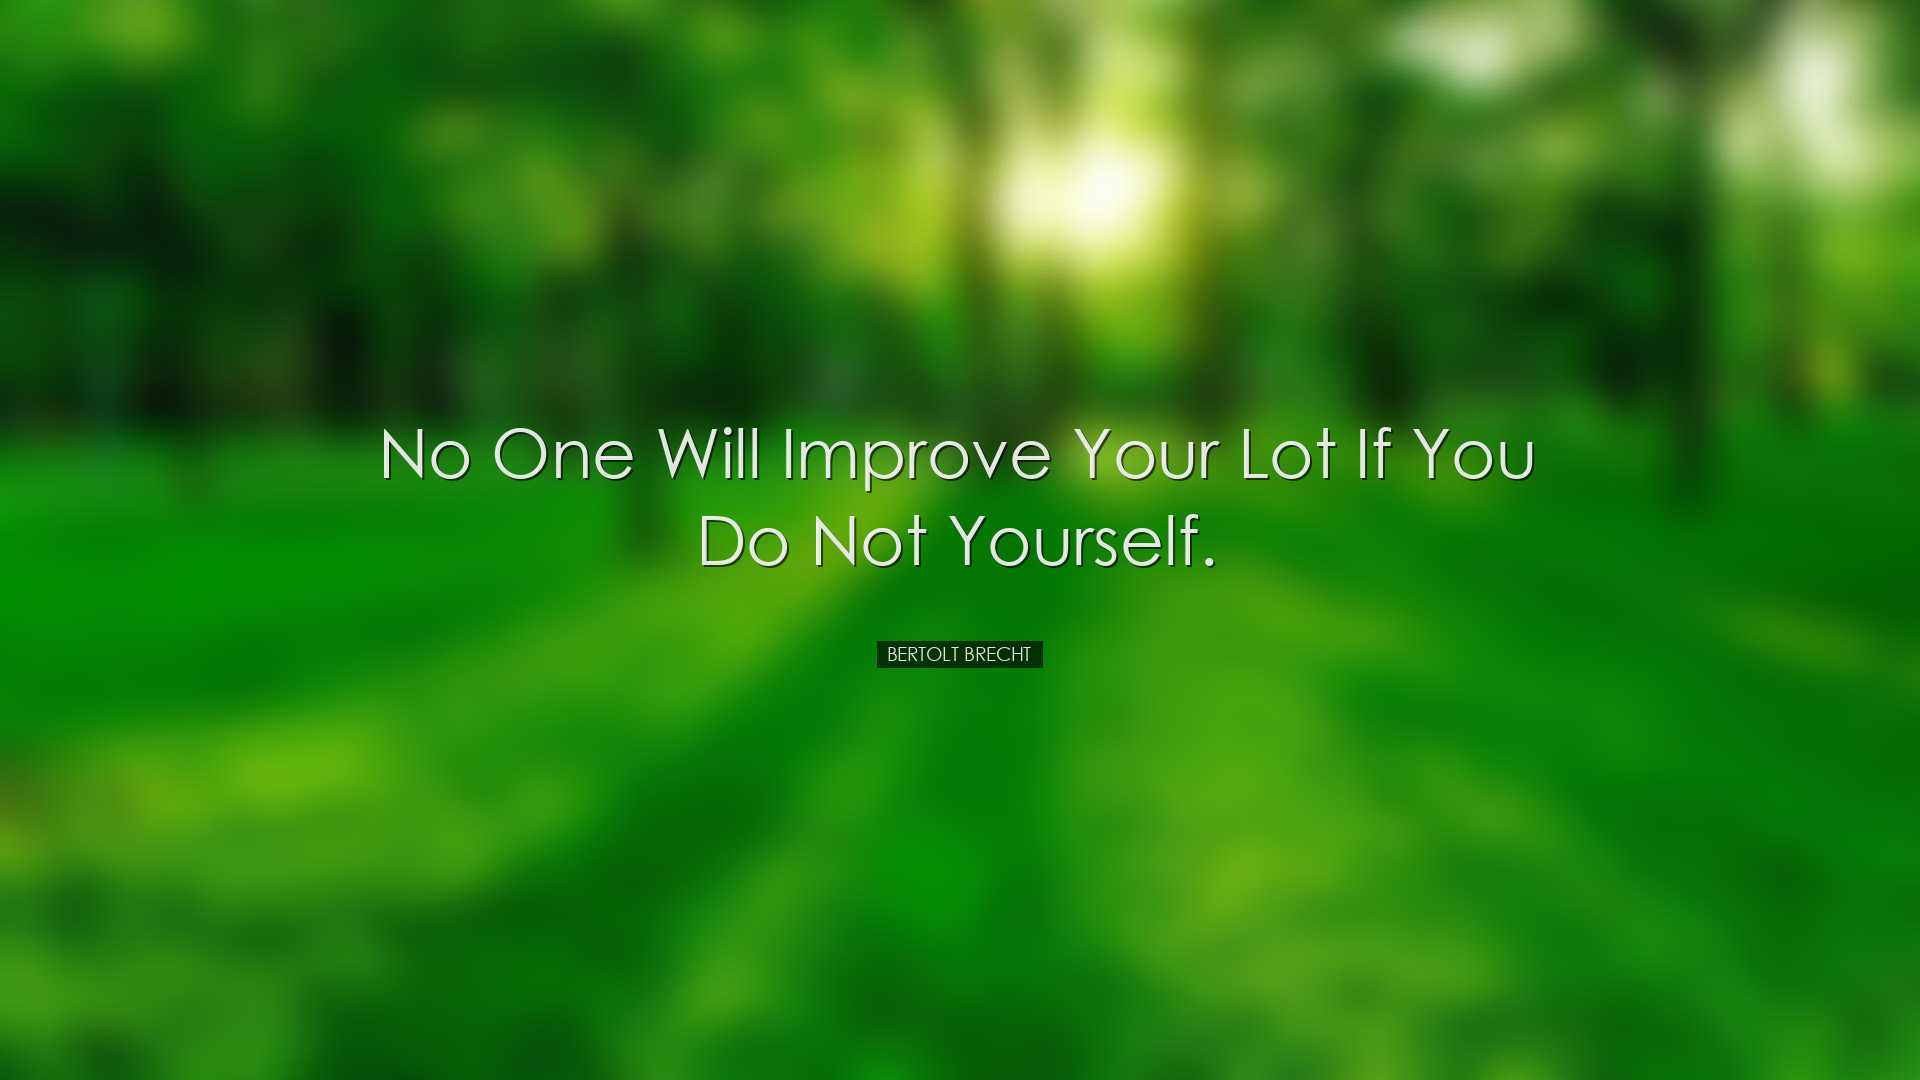 No one will improve your lot if you do not yourself. - Bertolt Bre